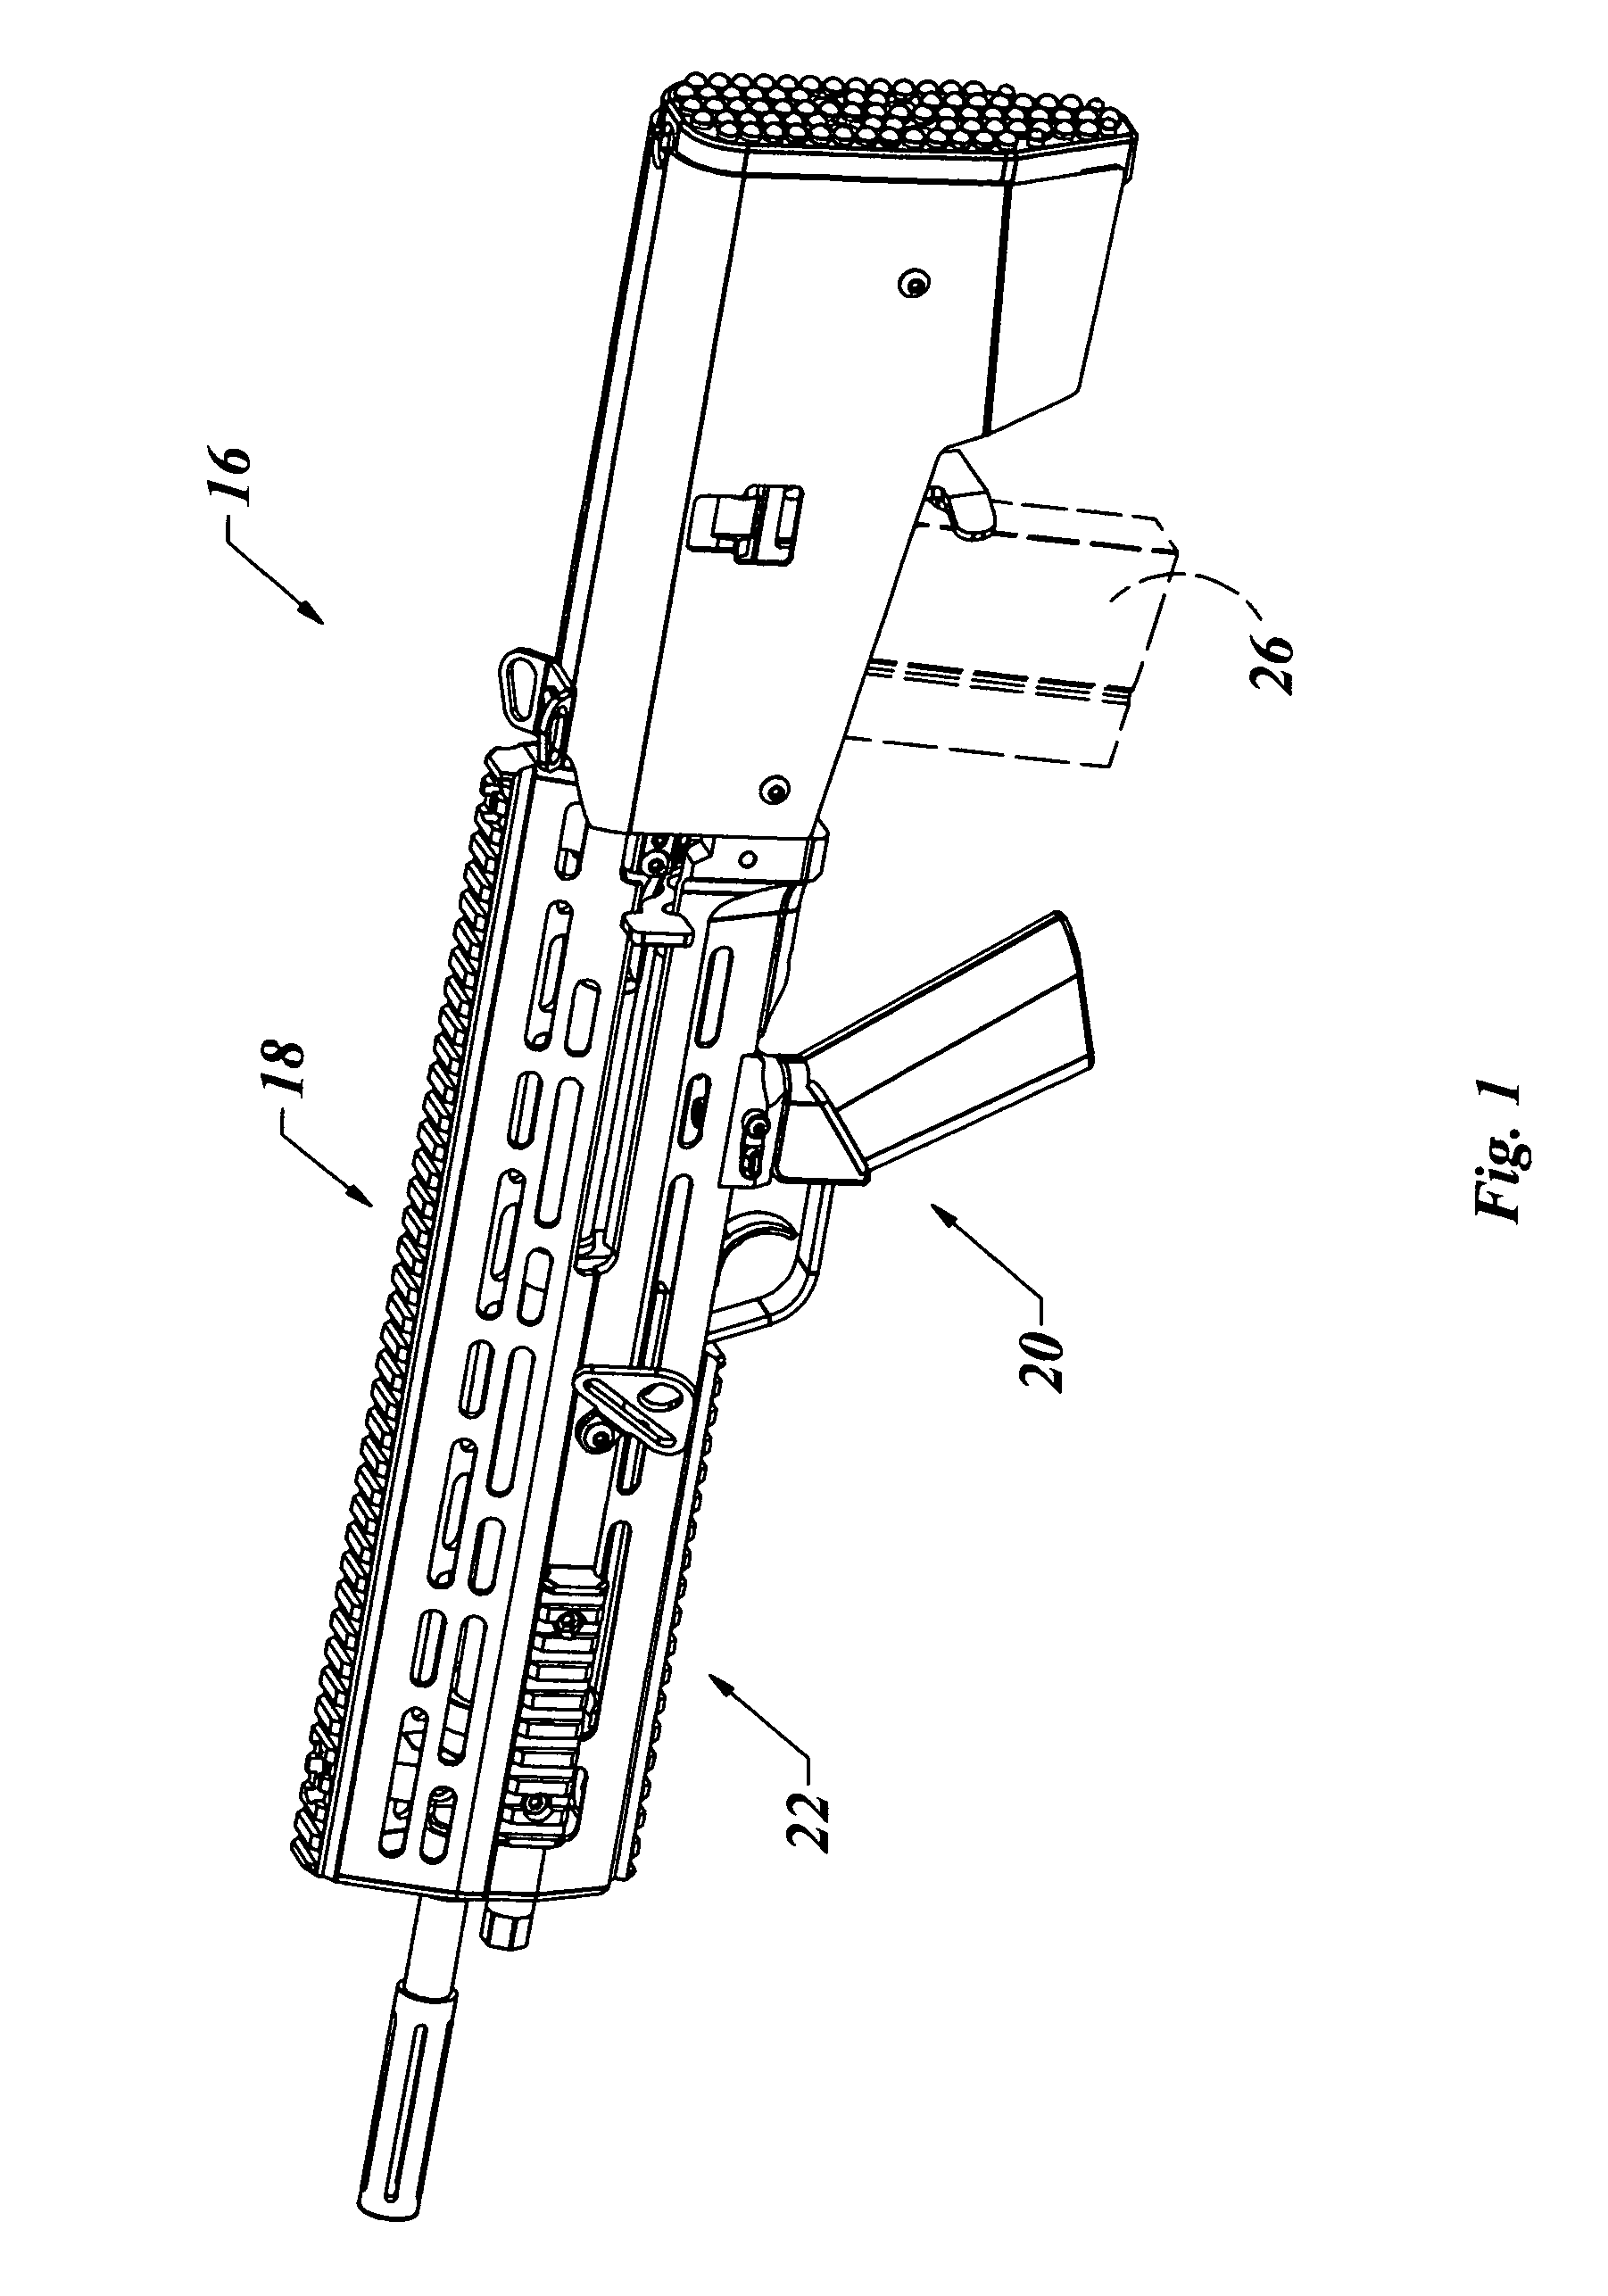 Replacement stock system for rifle